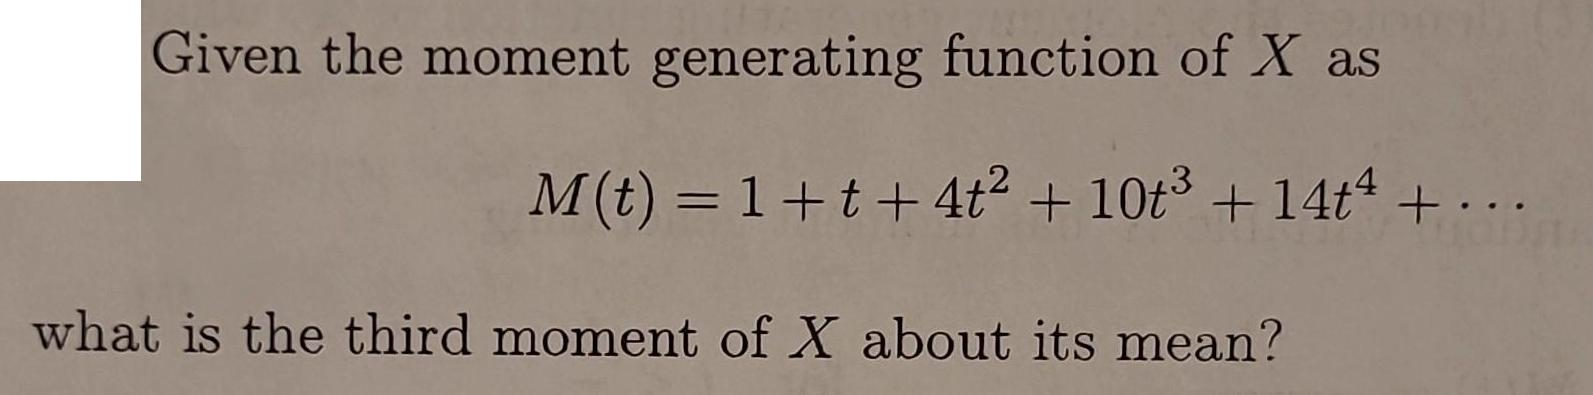 Given the moment generating function of X as M(t) = 1 +t+ 4t + 10t + 14t4 +... what is the third moment of X